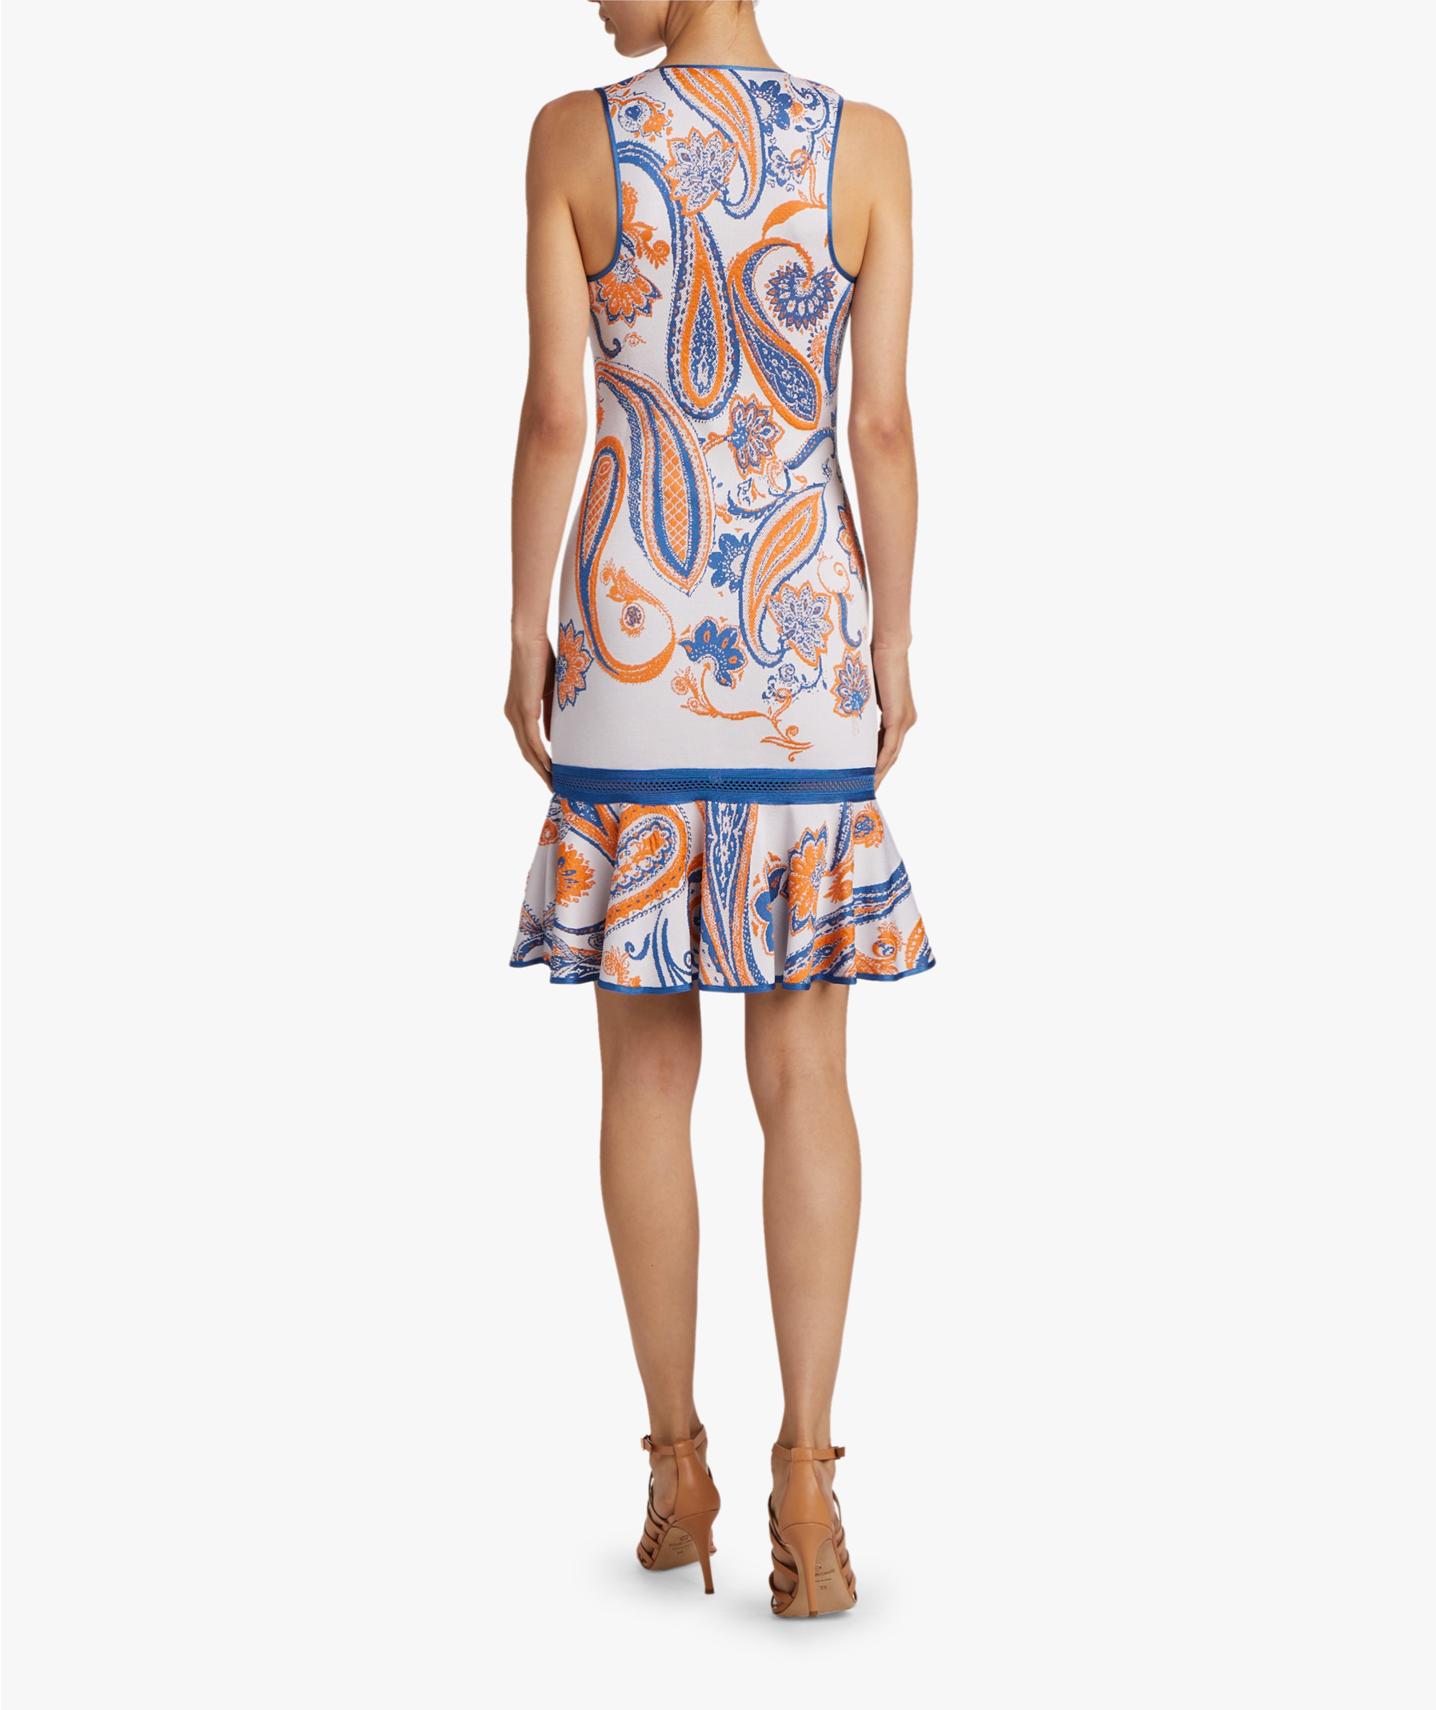 Roberto Cavalli Paisley Jacquard Knit Sleeveless Fitted Cocktail Dress Size 42 In Excellent Condition For Sale In Paradise Island, BS